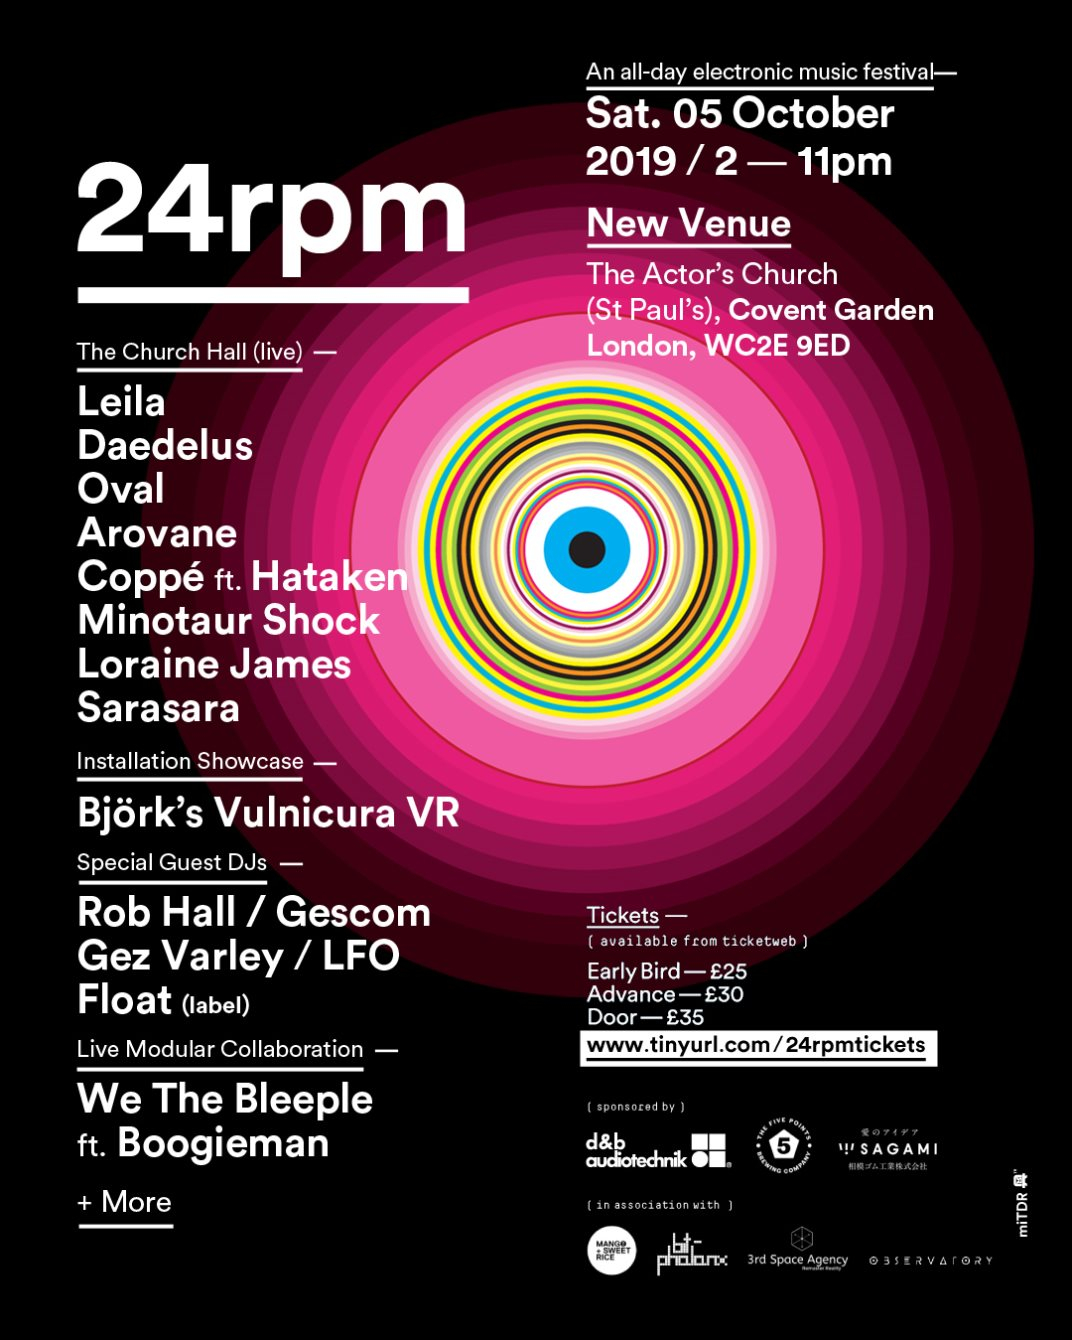 24rpm: An All-Day Electronic Music Festival - Flyer front